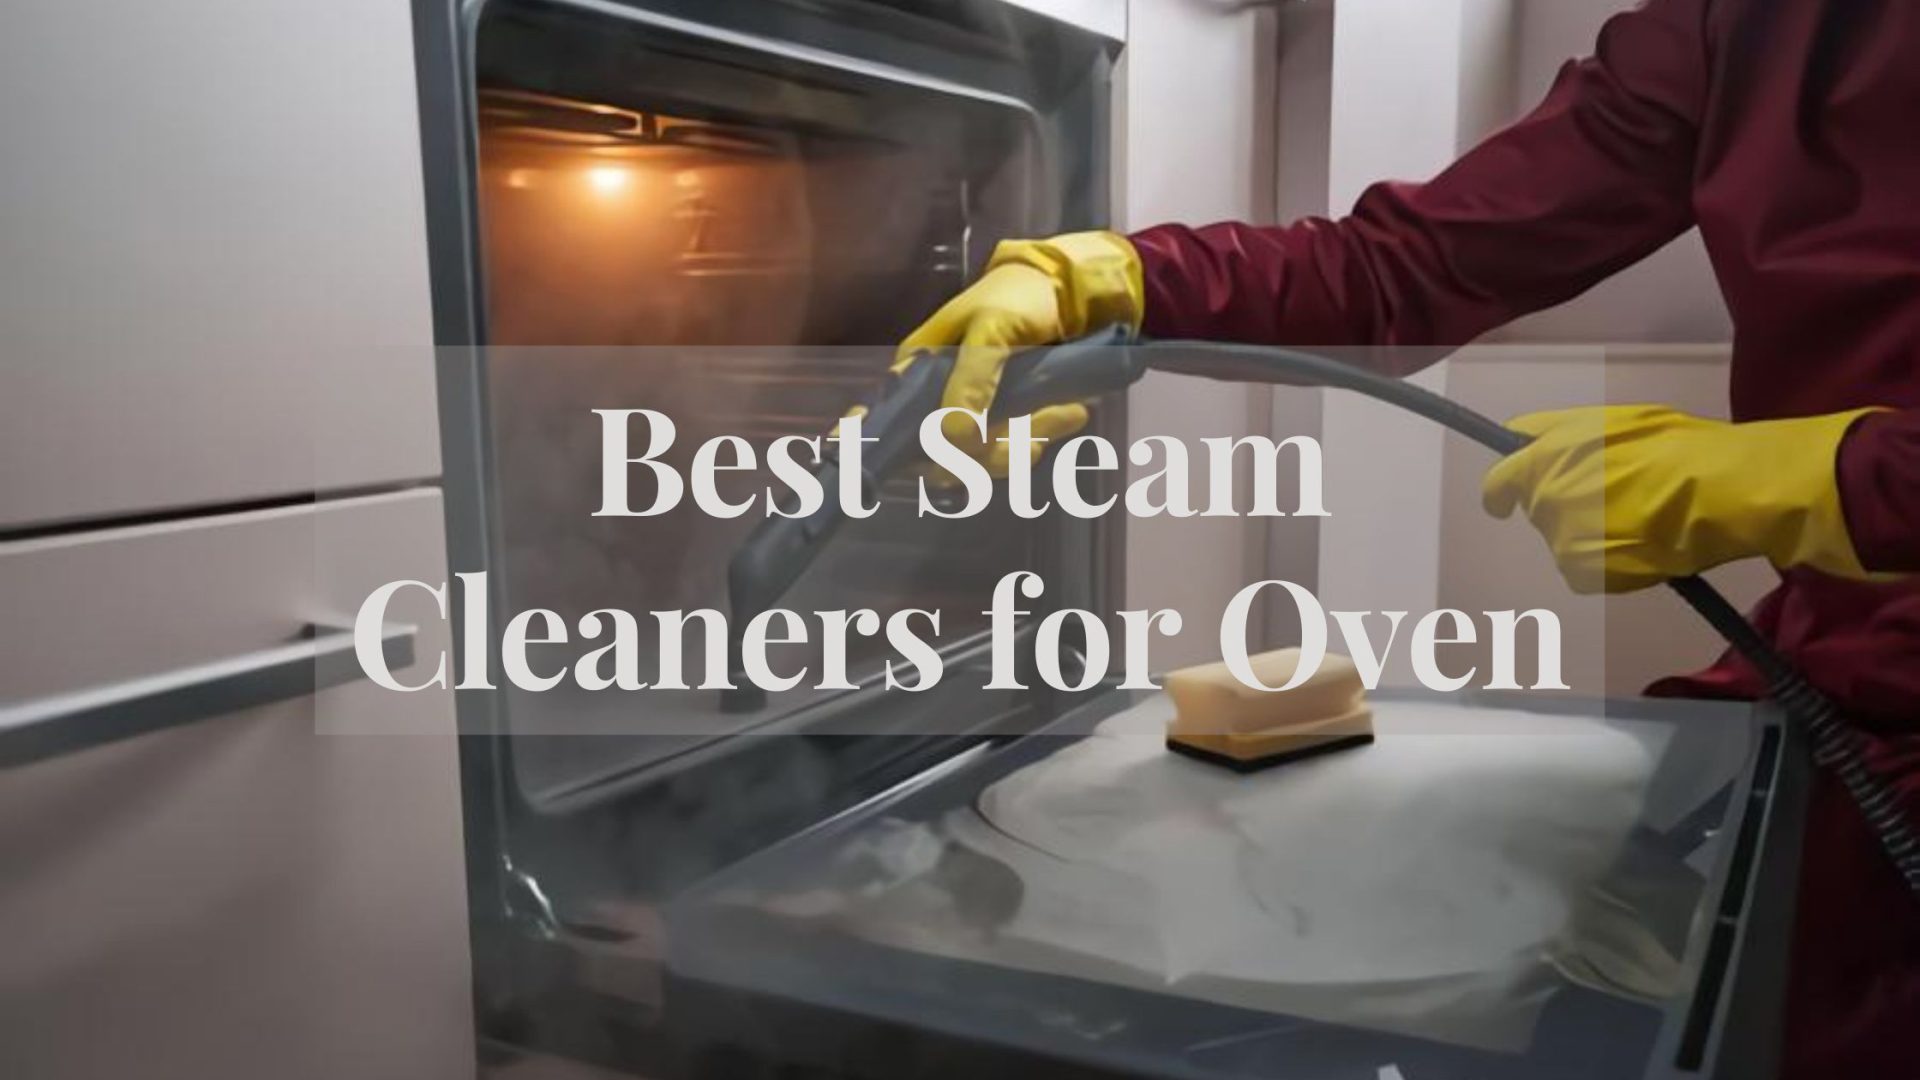 Best Steam Cleaners for Oven